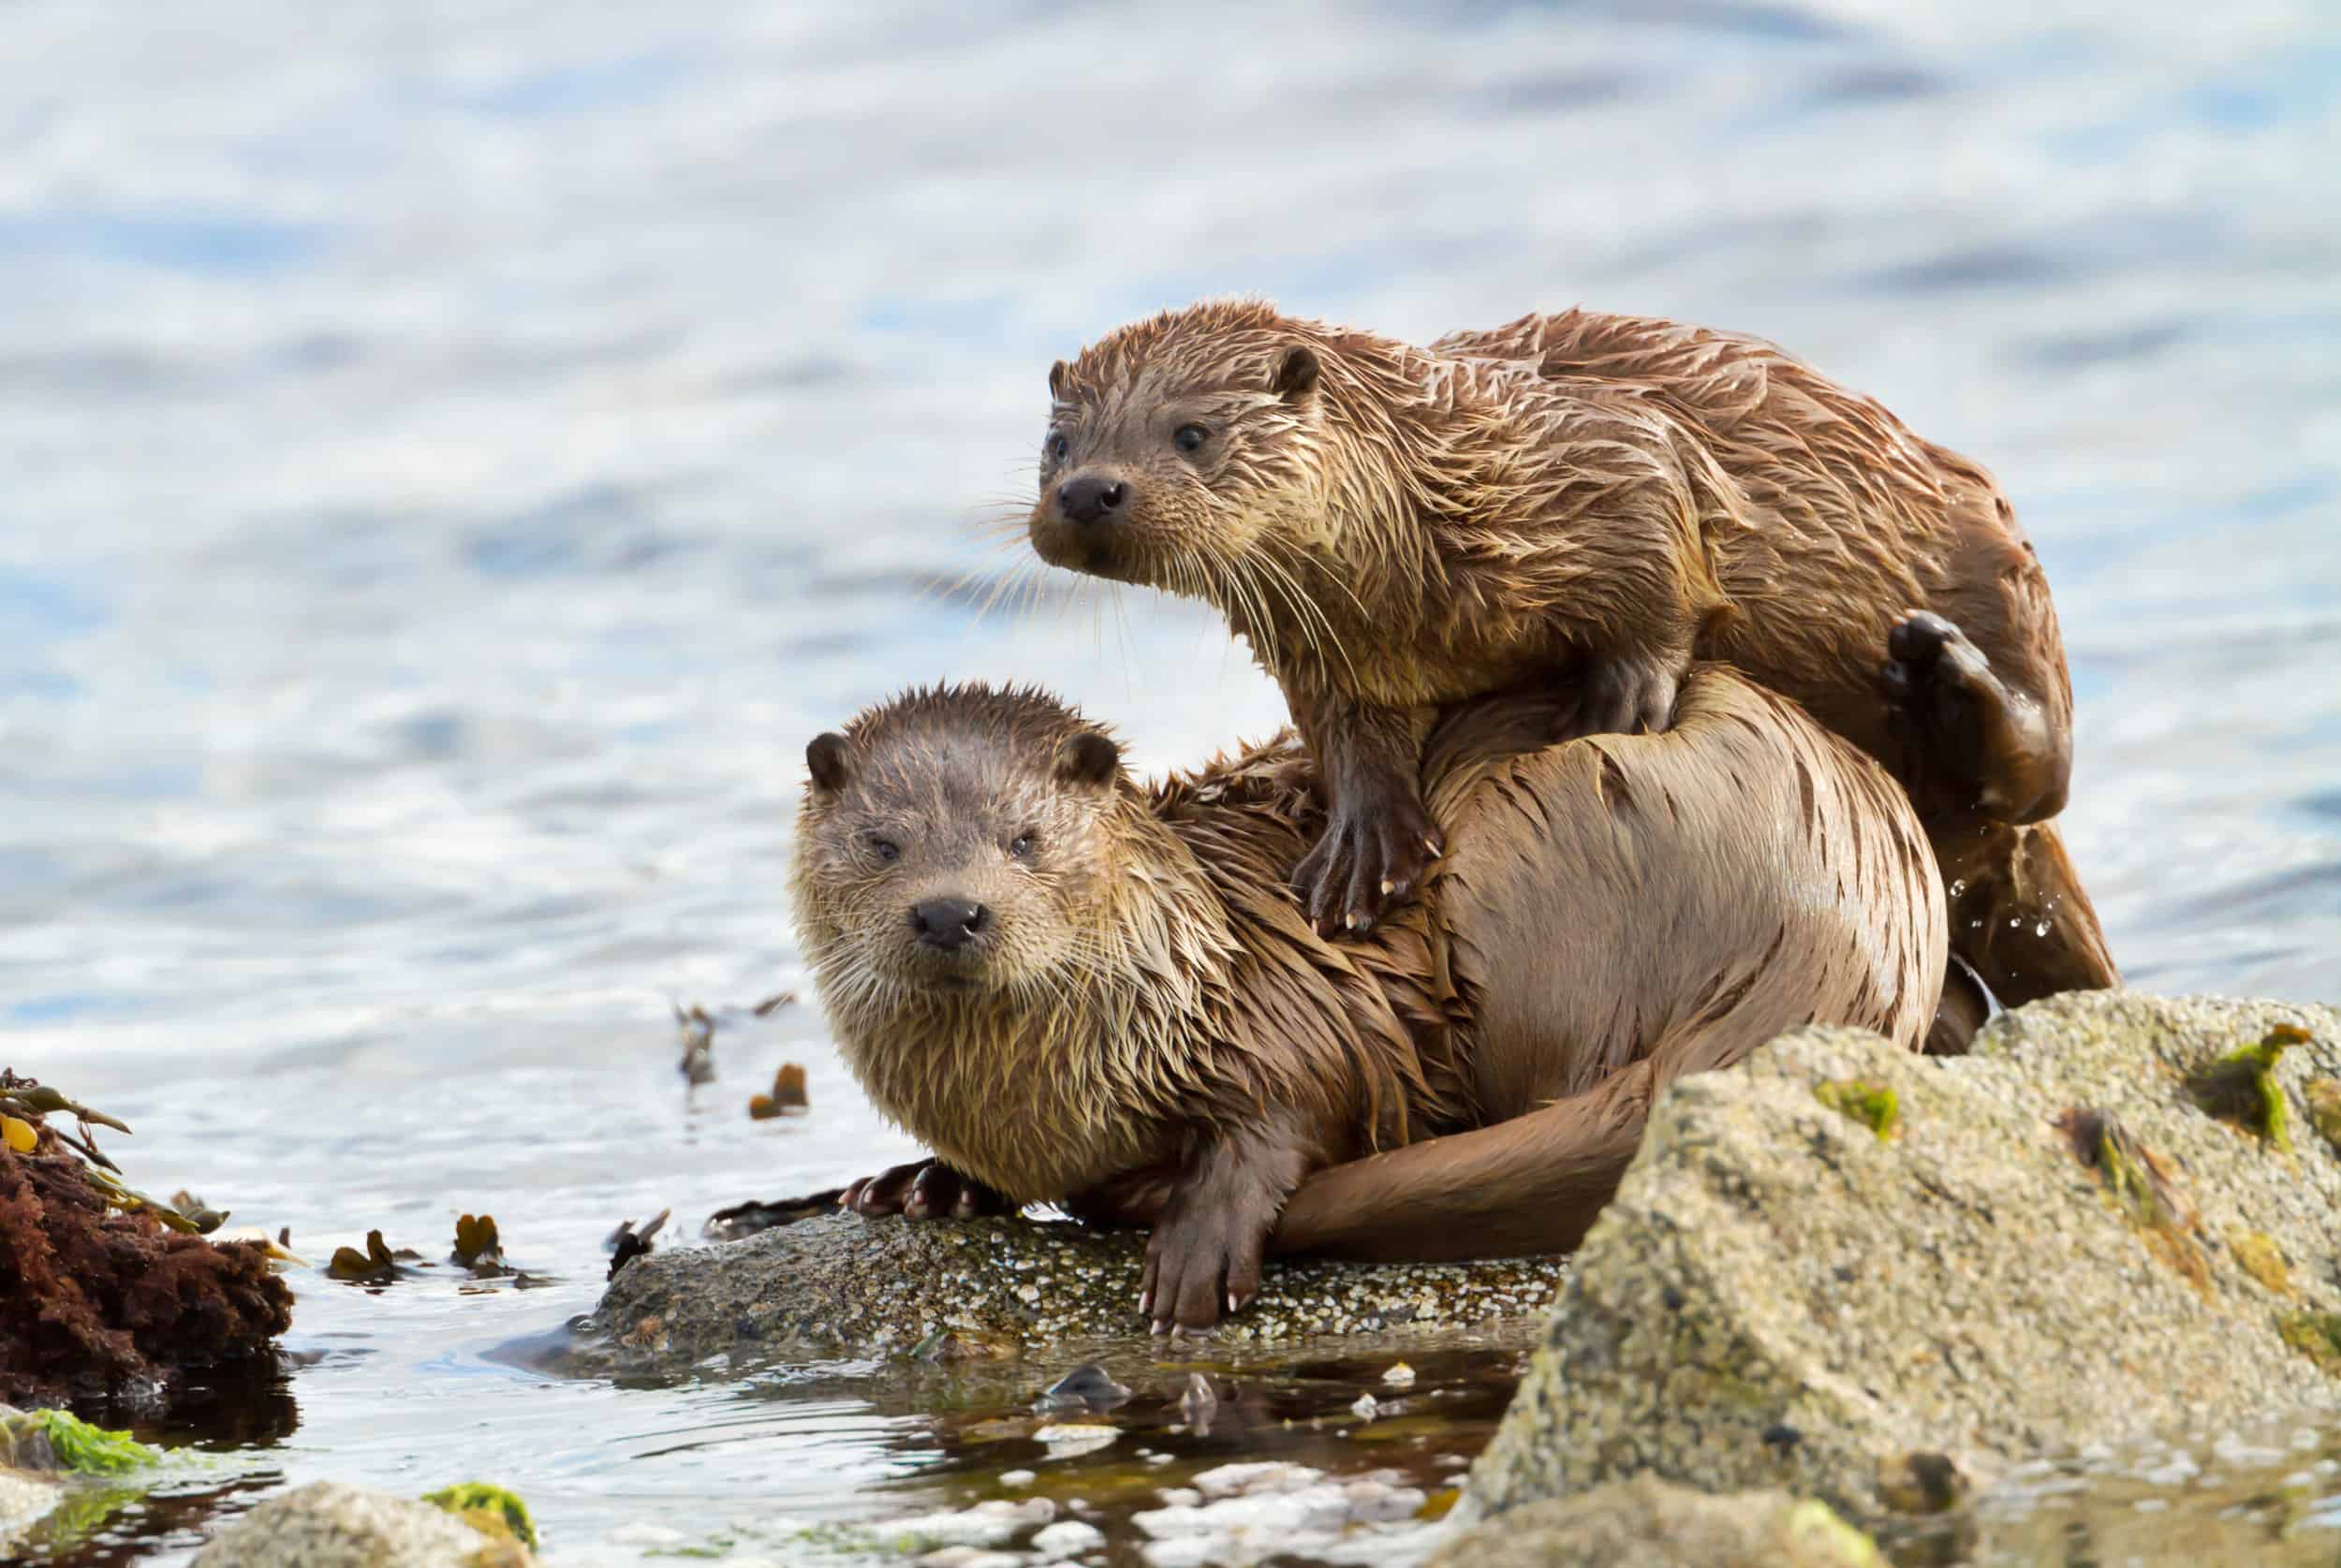 Otters resting on a rock. Learn about otter ecology on our course.